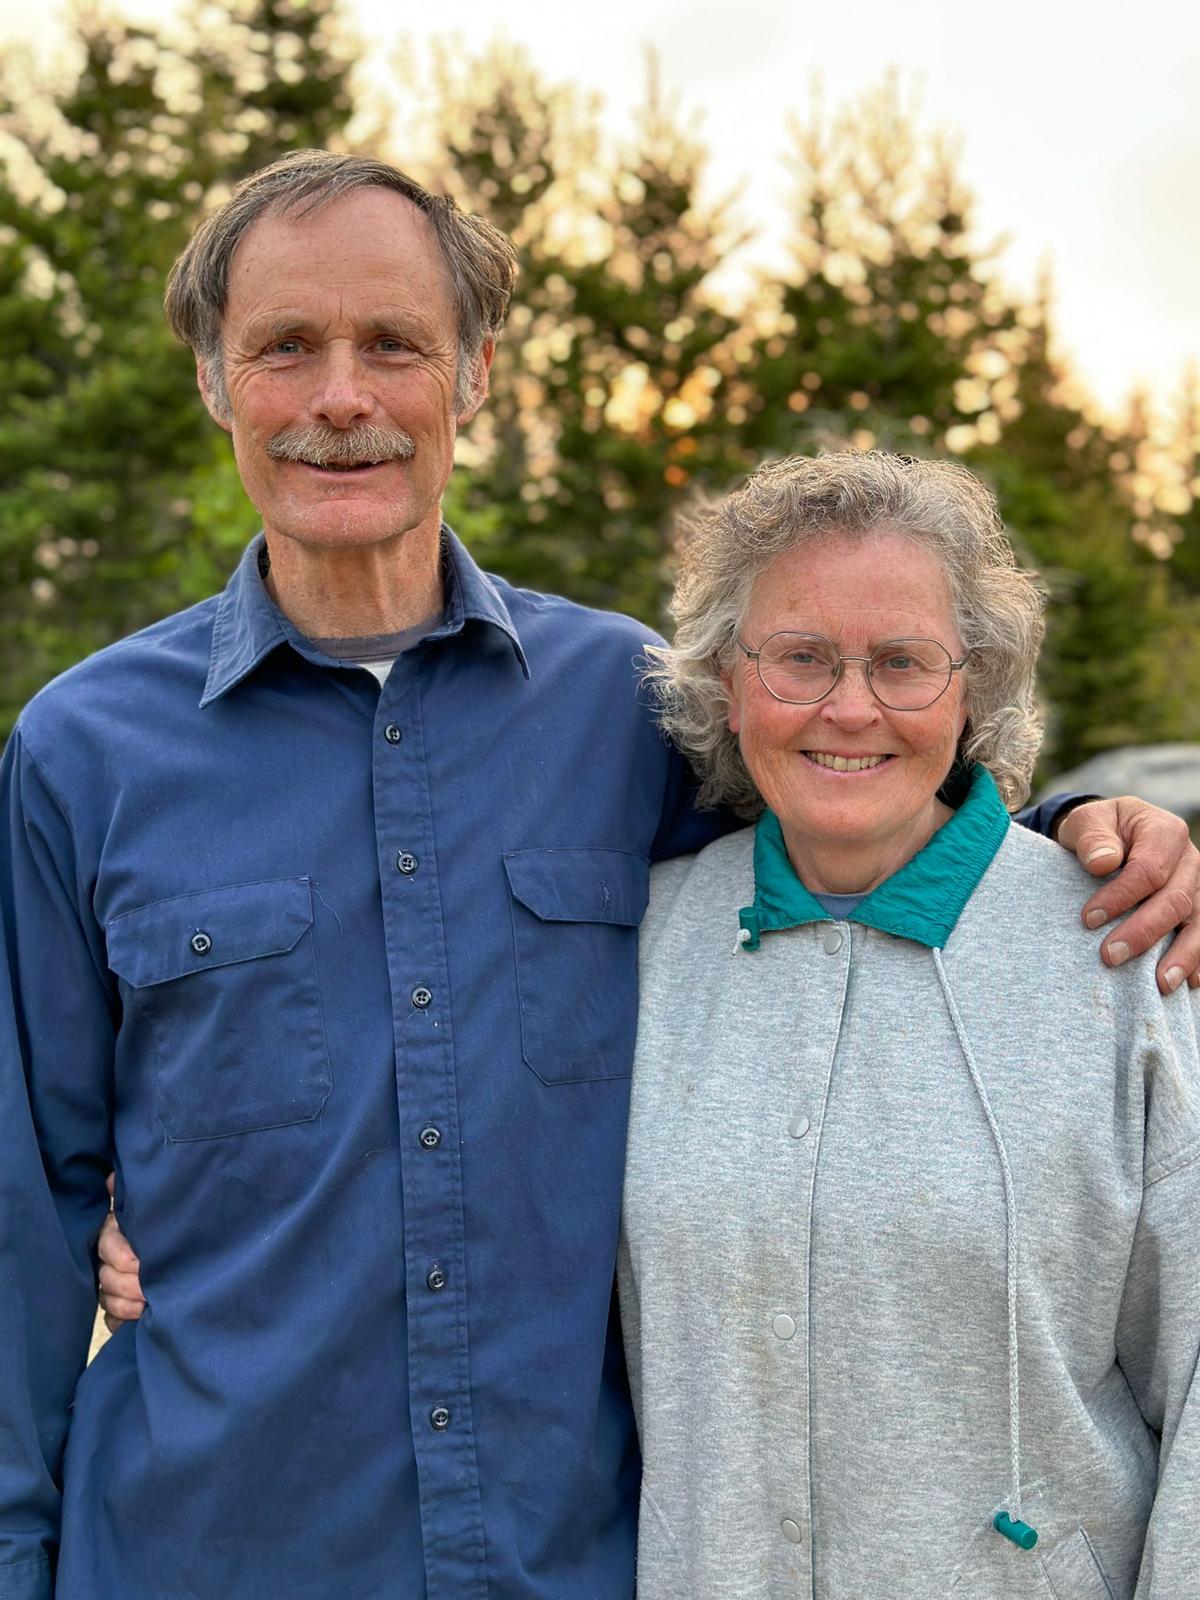 Ron Melchiore with his wife, Johanna. Their book "The Self-Sufficient Backyard for Independent Homesteaders" has sold close to 200,000 copies. (Courtesy of Ron Melchiore)